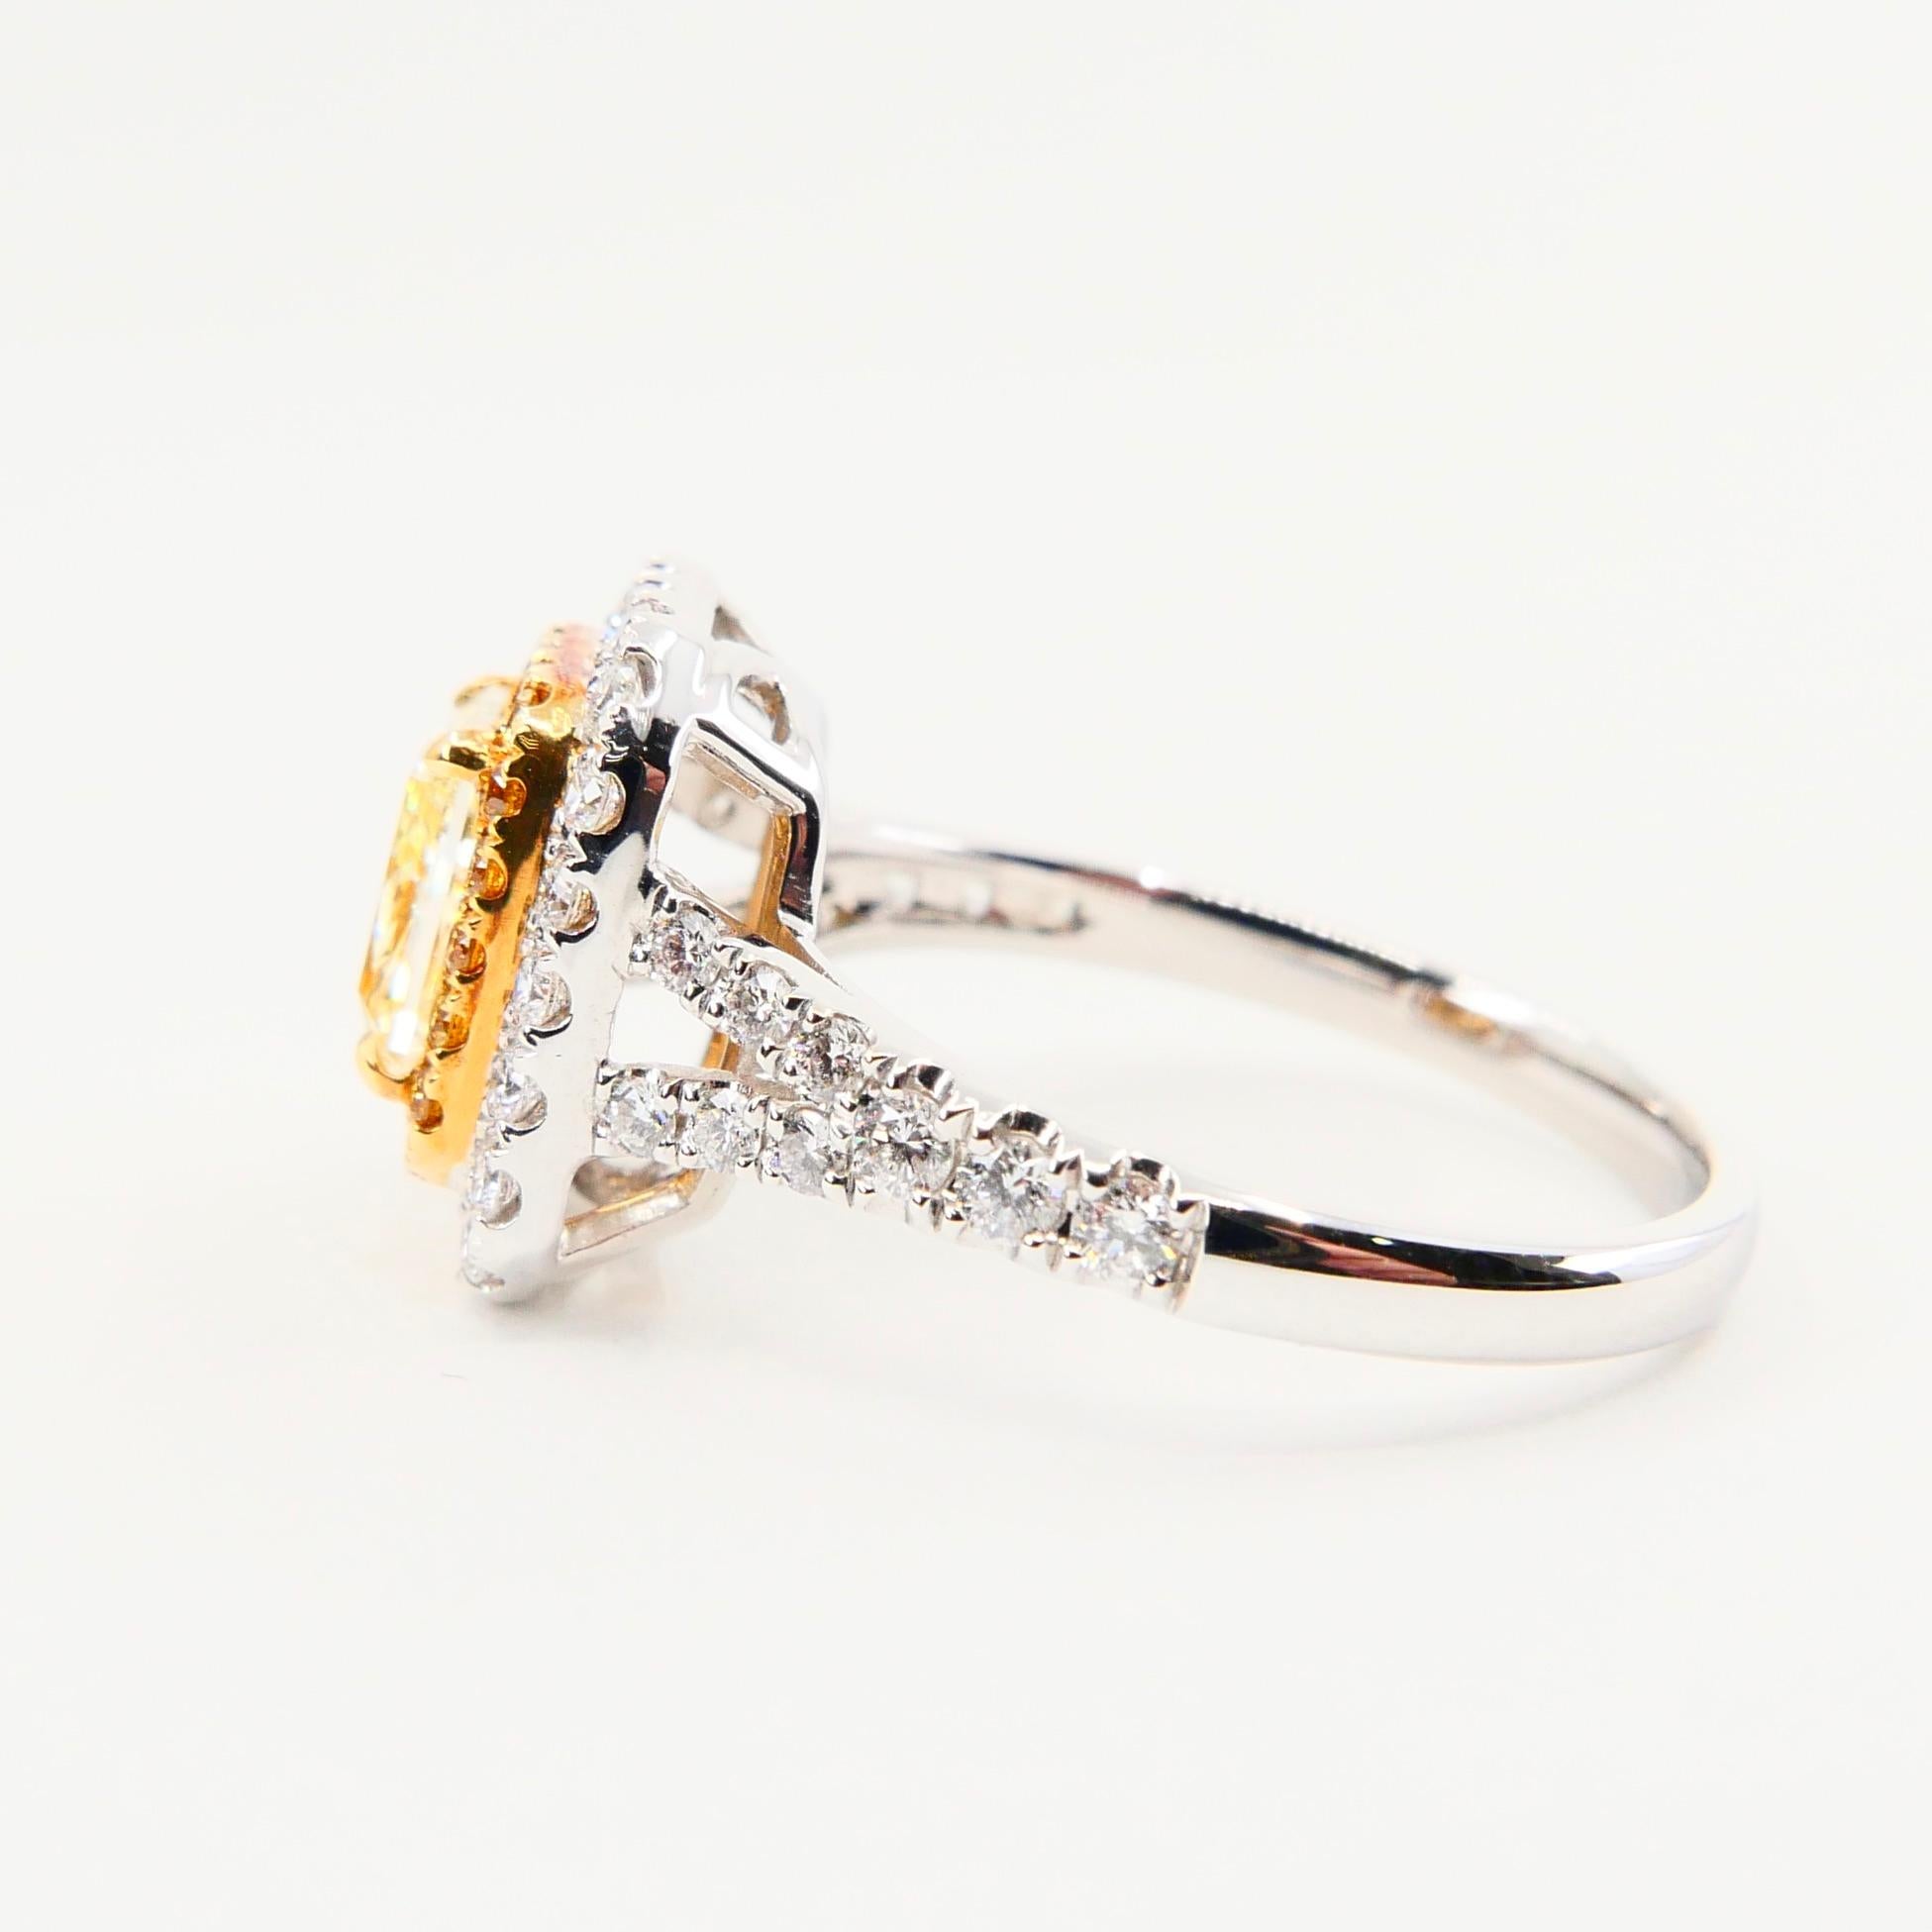 Radiant Cut GIA Certified 1.06 Carat Cape Yellow Diamond Cocktail Ring, Double Halo Setting For Sale